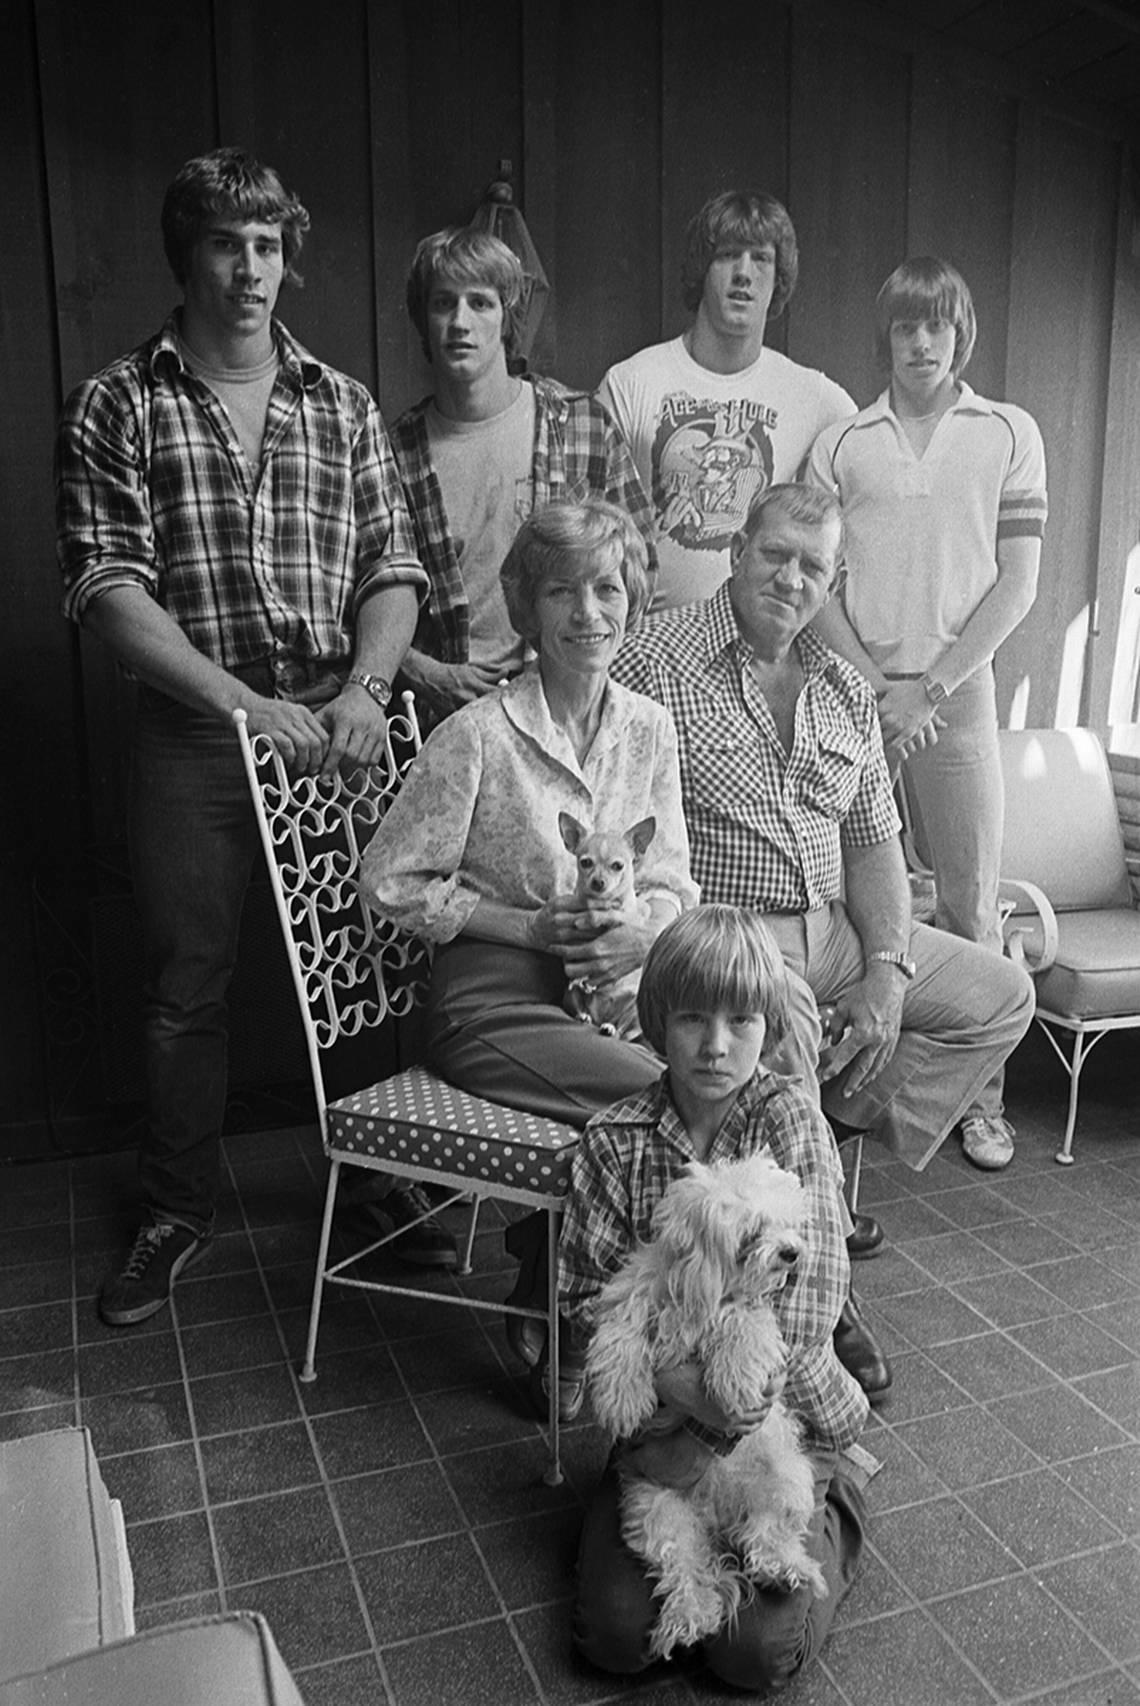 March 15, 1980: Fritz Von Erich says the family “loves the heck out of each other.” Standing are Kerry, Kevin, David, and Mike; sitting are Doris and Fritz Von Erich, and Chris is kneeling. They are pictured in their home and two family dogs are seen in Doris’ and Chris’ laps.